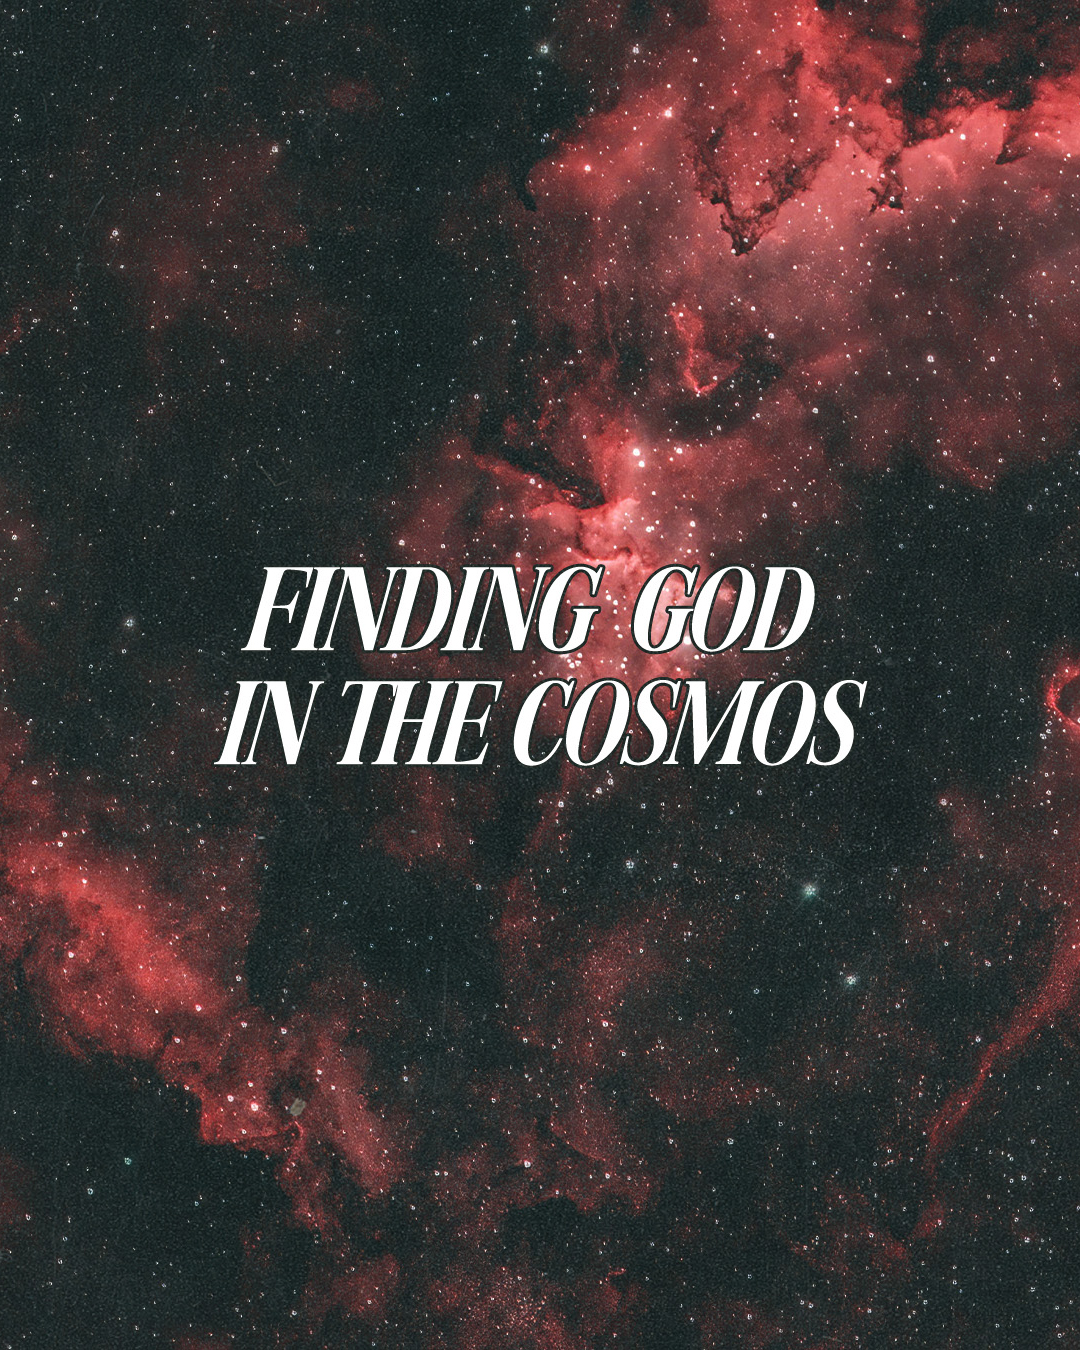 Finding God in the cosmos